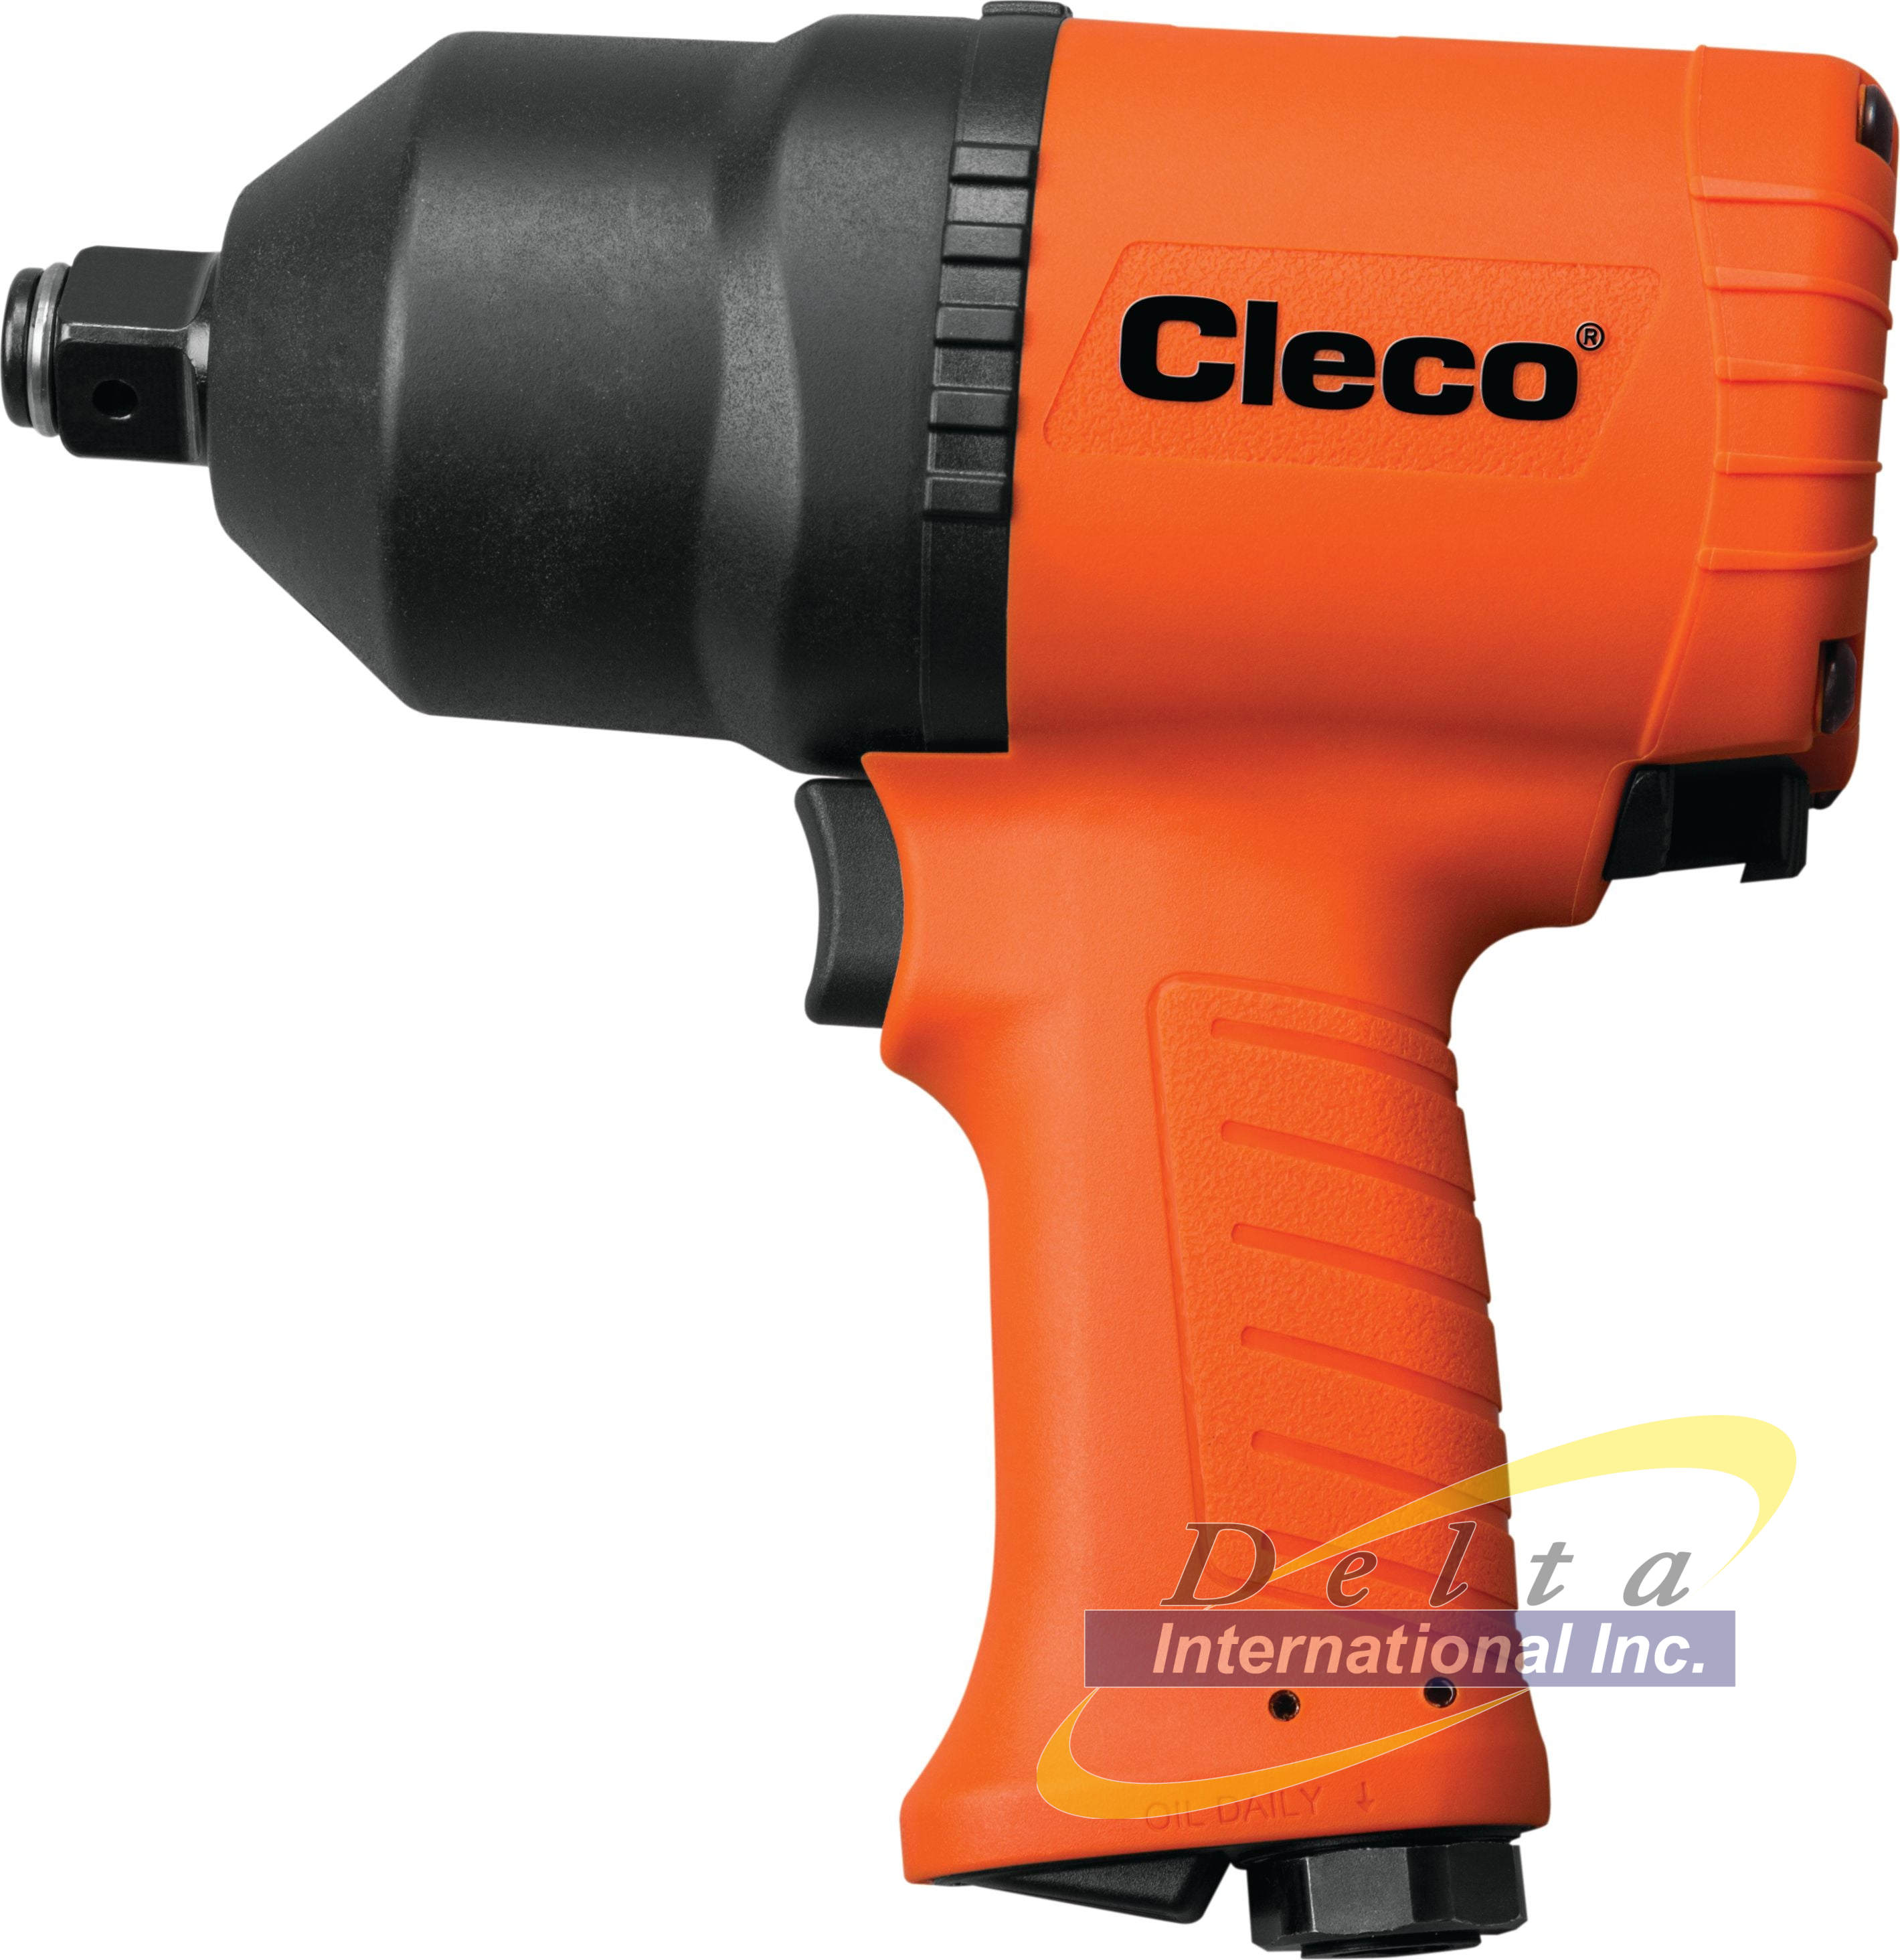 Cleco CWC-500P - CWC Premium Composite Series Impact Wrench